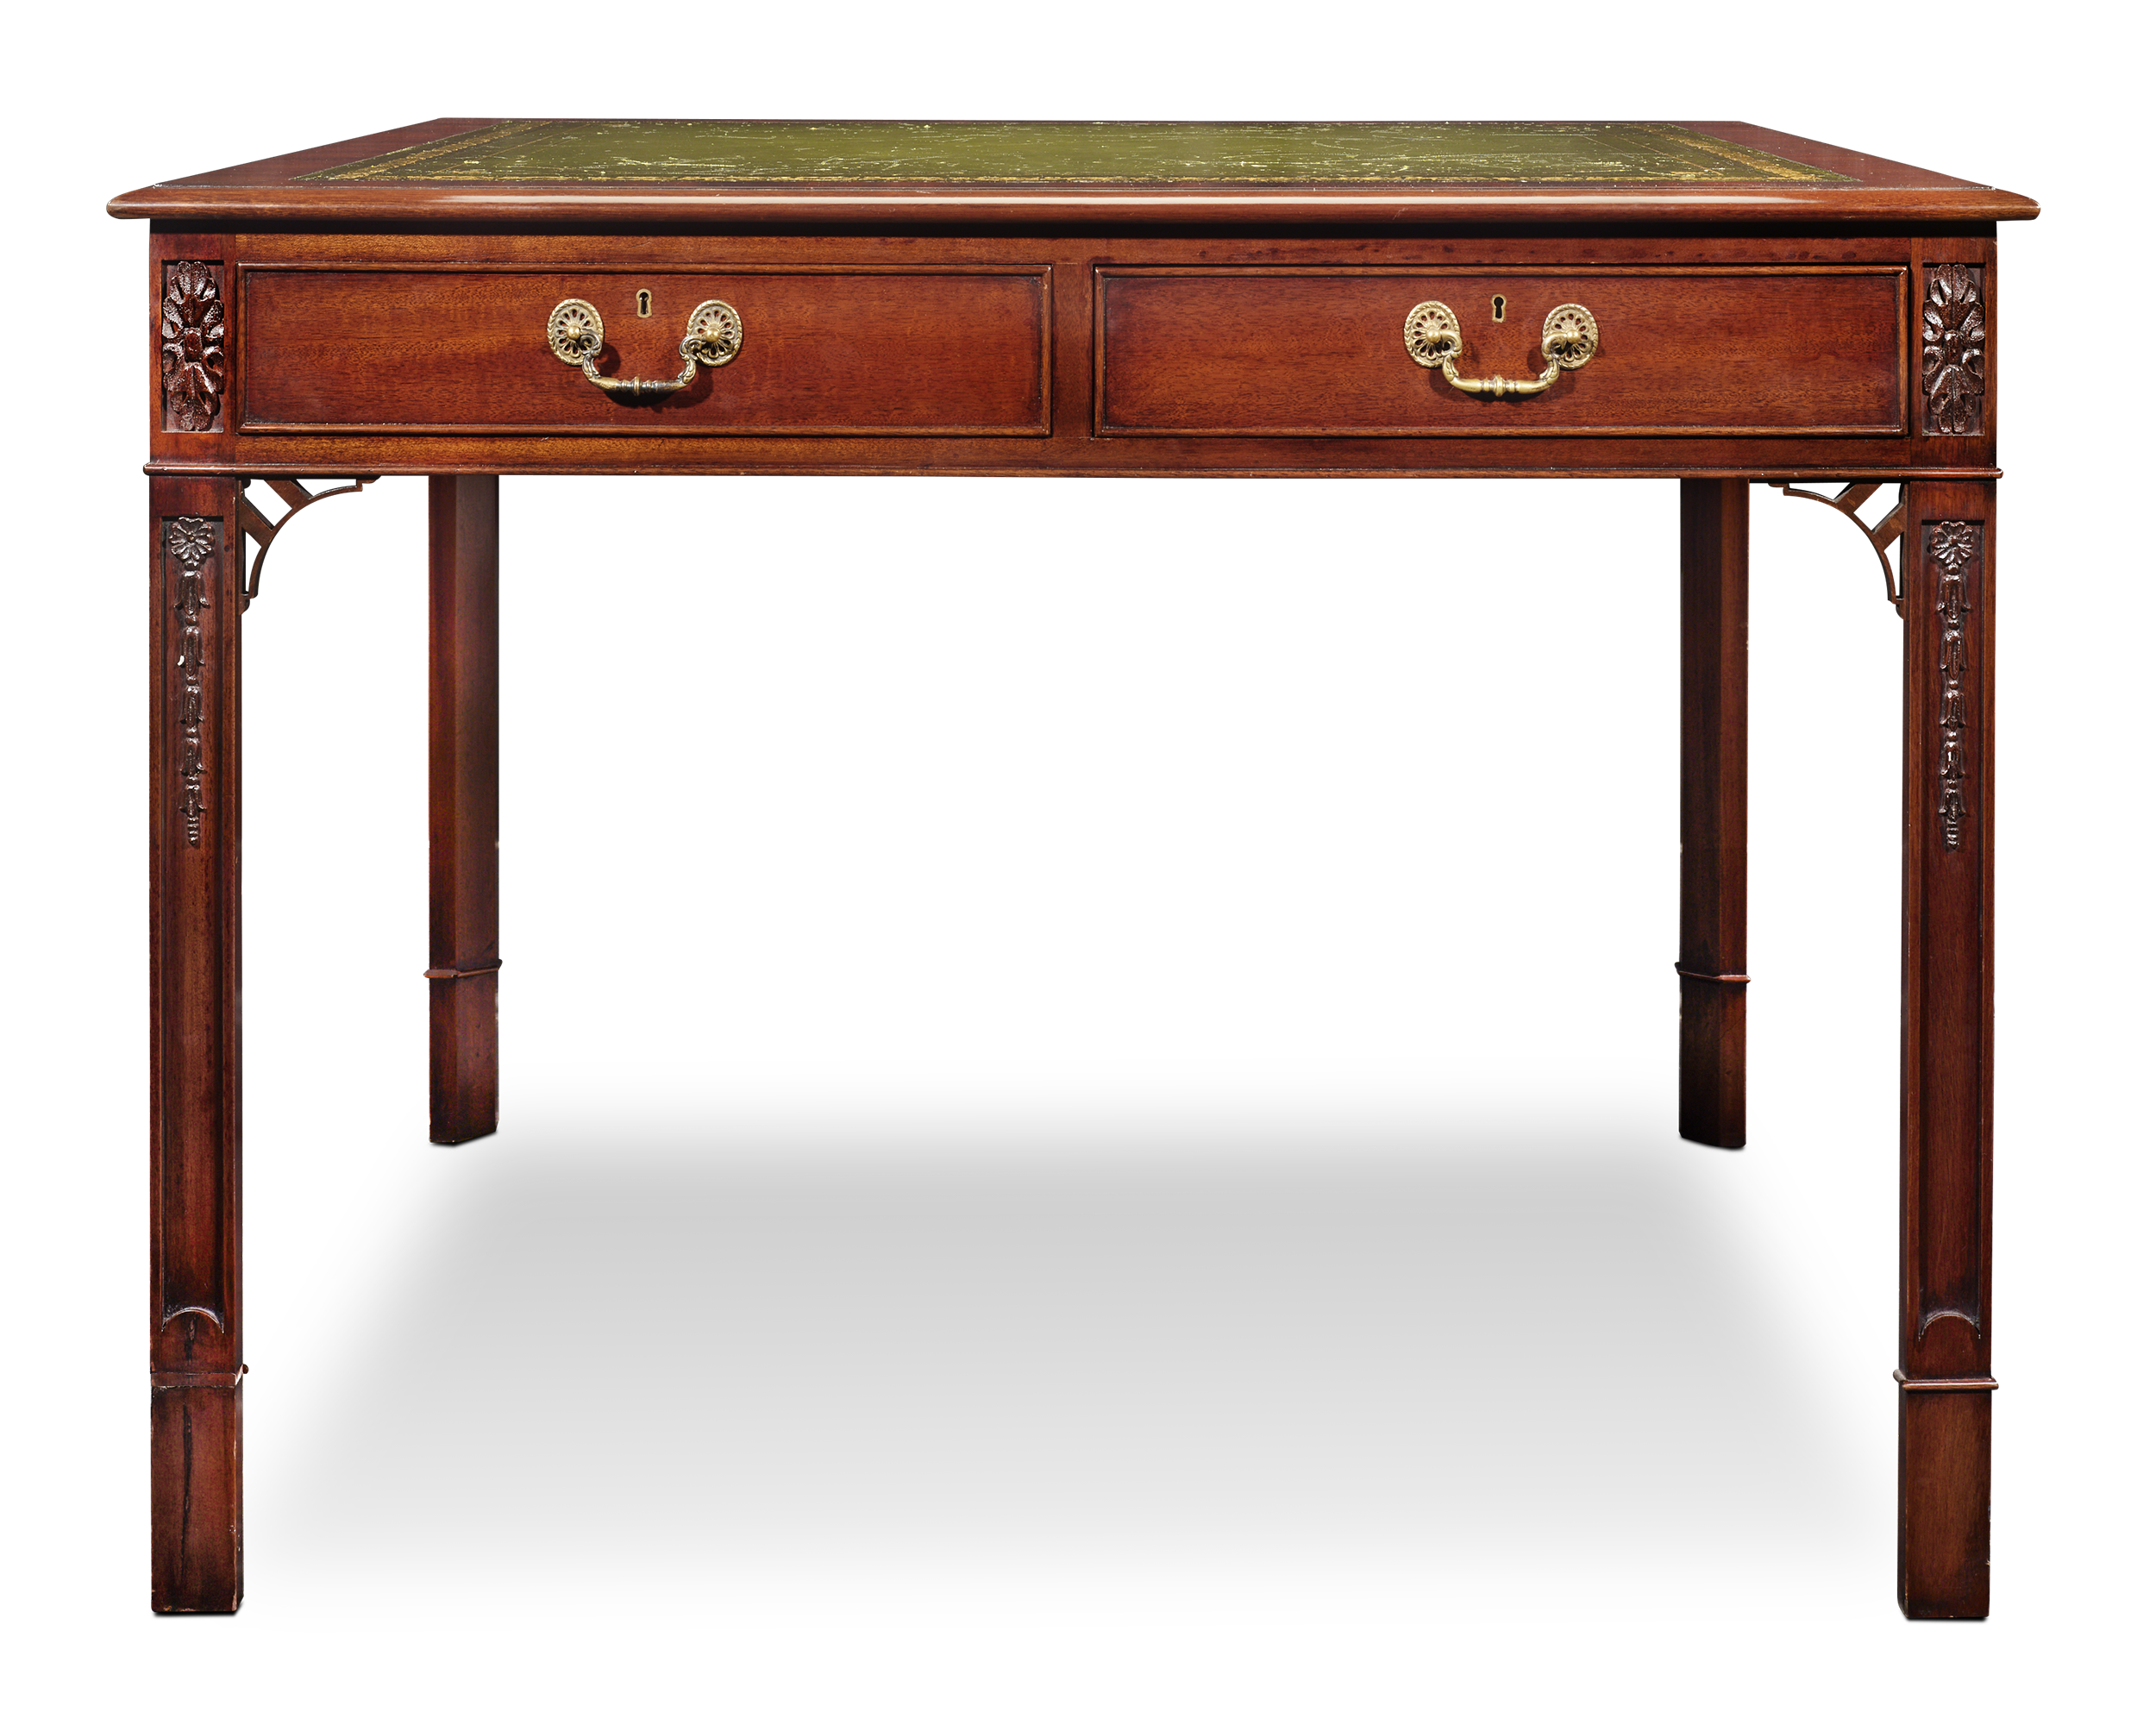 Regency-Style Library Table